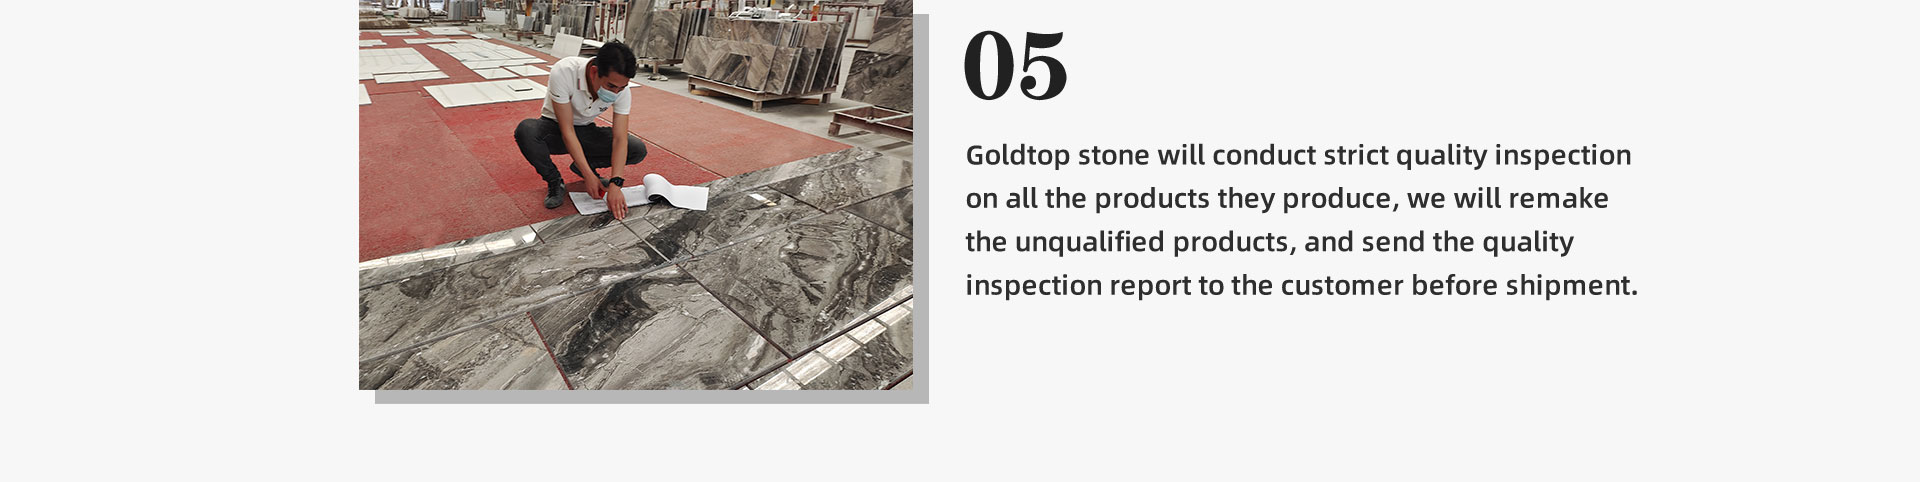 5.Goldtop stone will conduct strict quality inspection on all the products they produce, we will remake the unqualified products, and send the quality inspection report to the customer before shipment.